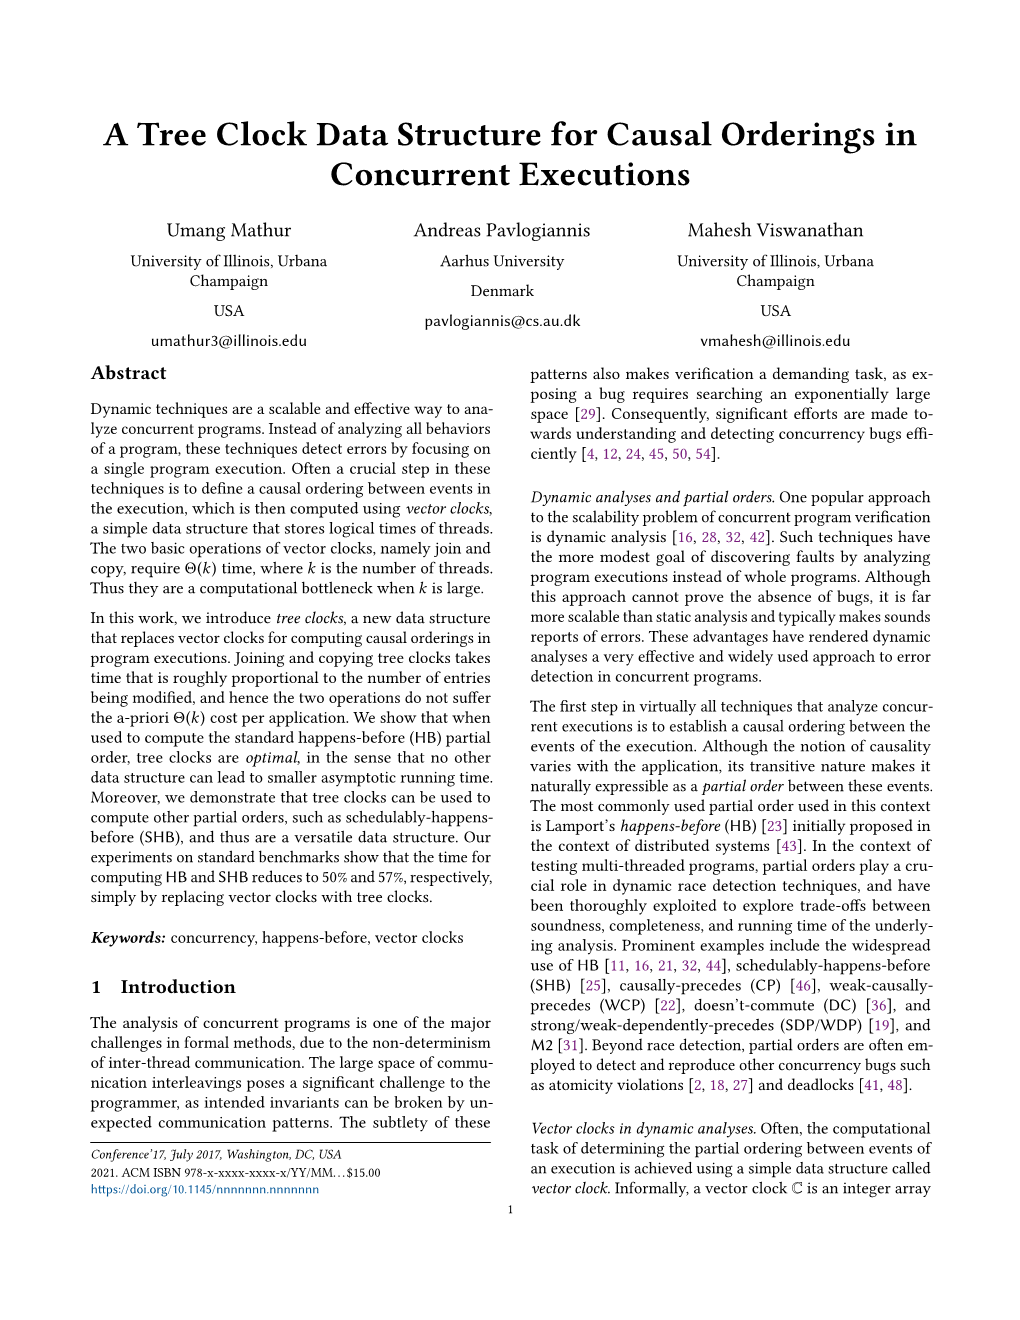 A Tree Clock Data Structure for Causal Orderings in Concurrent Executions